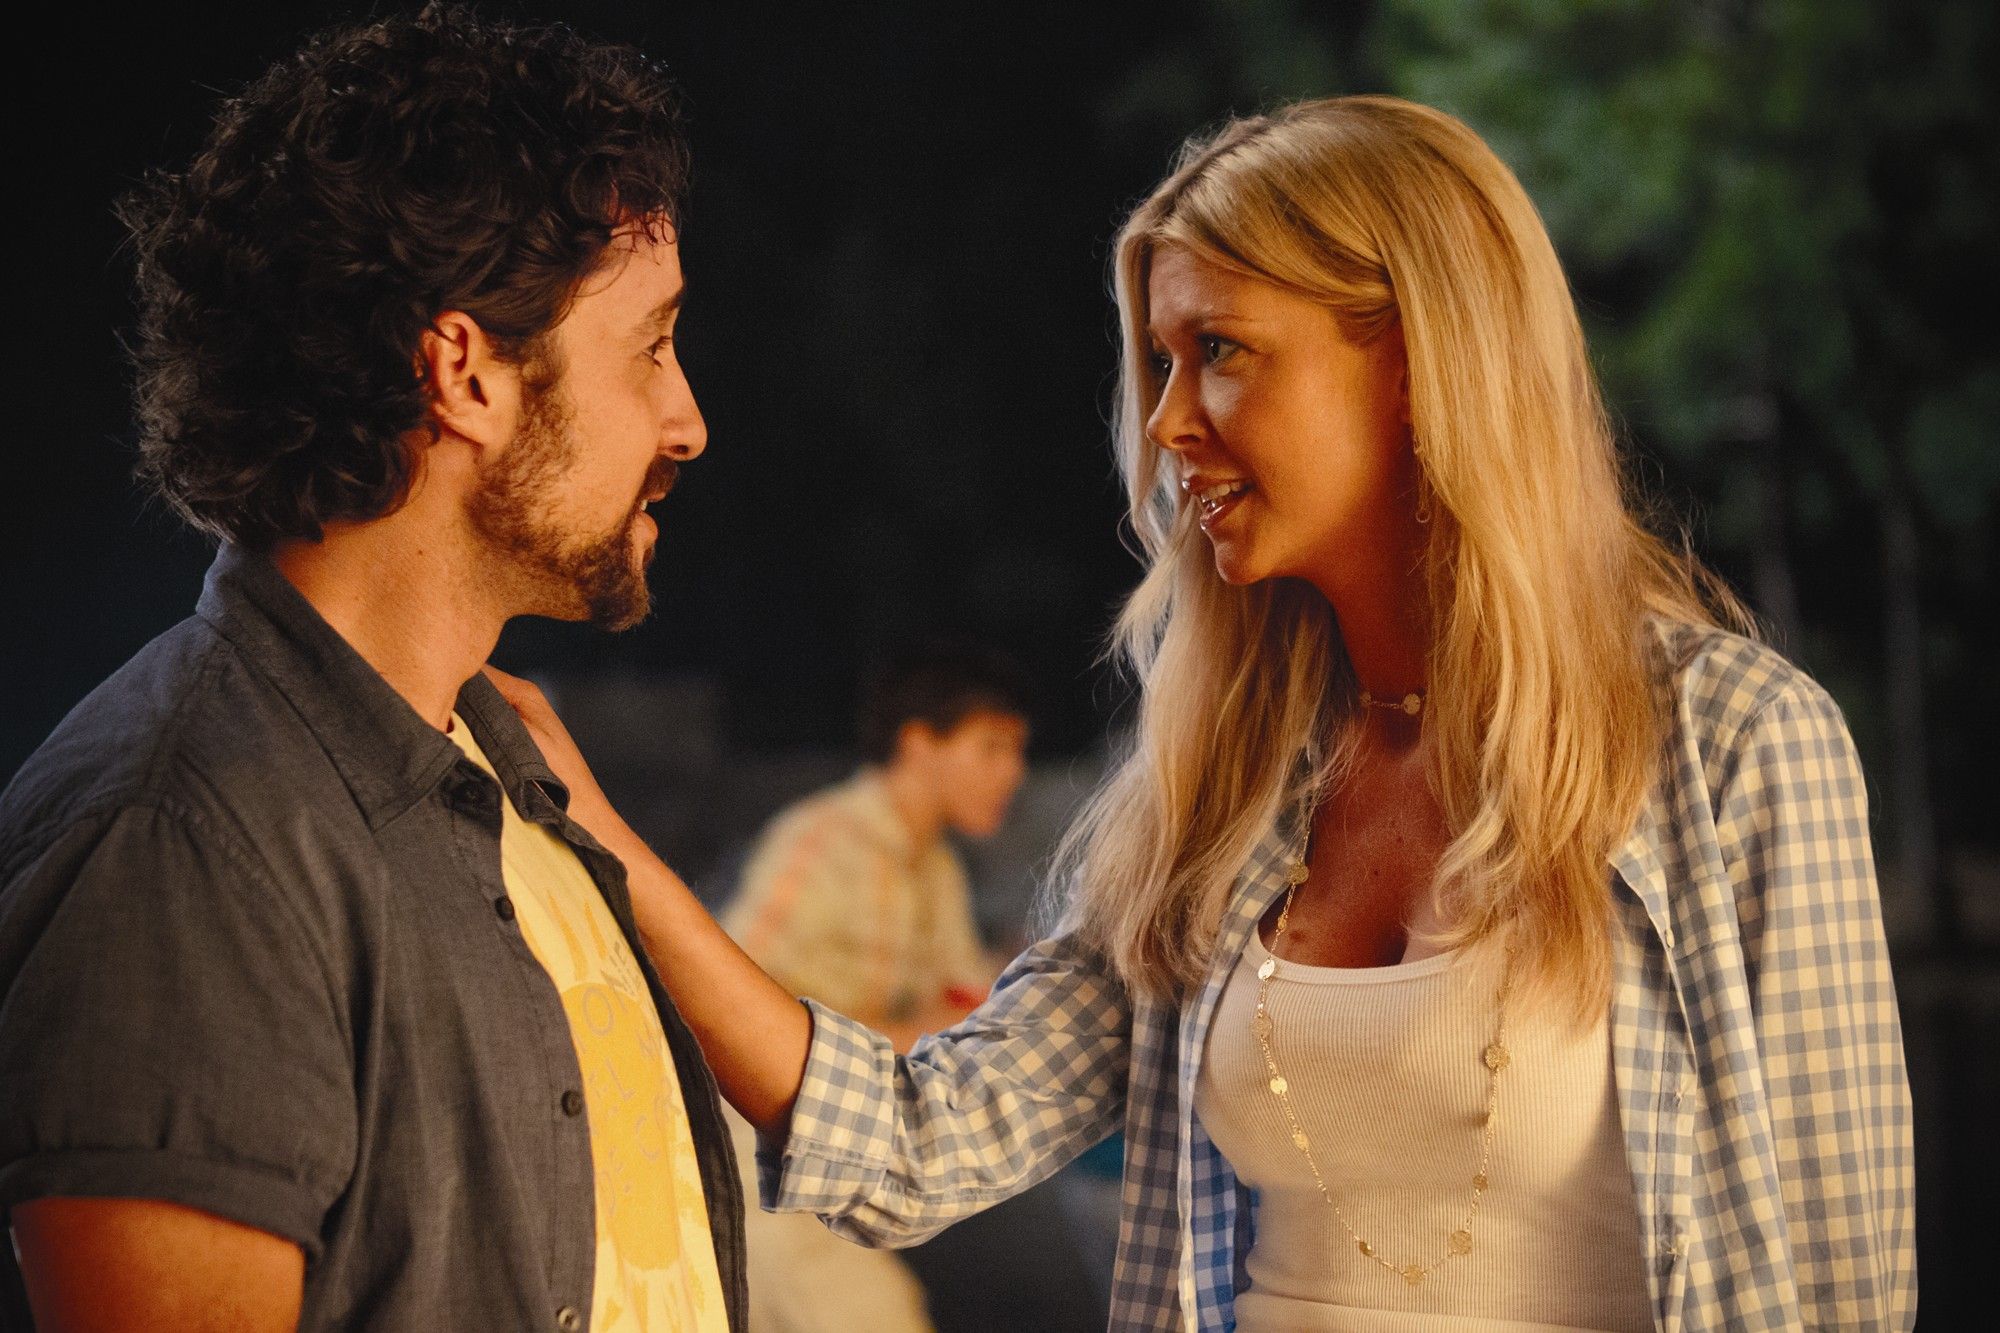 Thomas Ian Nicholas stars as Kevin Myers and Tara Reid stars as Vicky Lathum in Universal Pictures' American Reunion (2012)